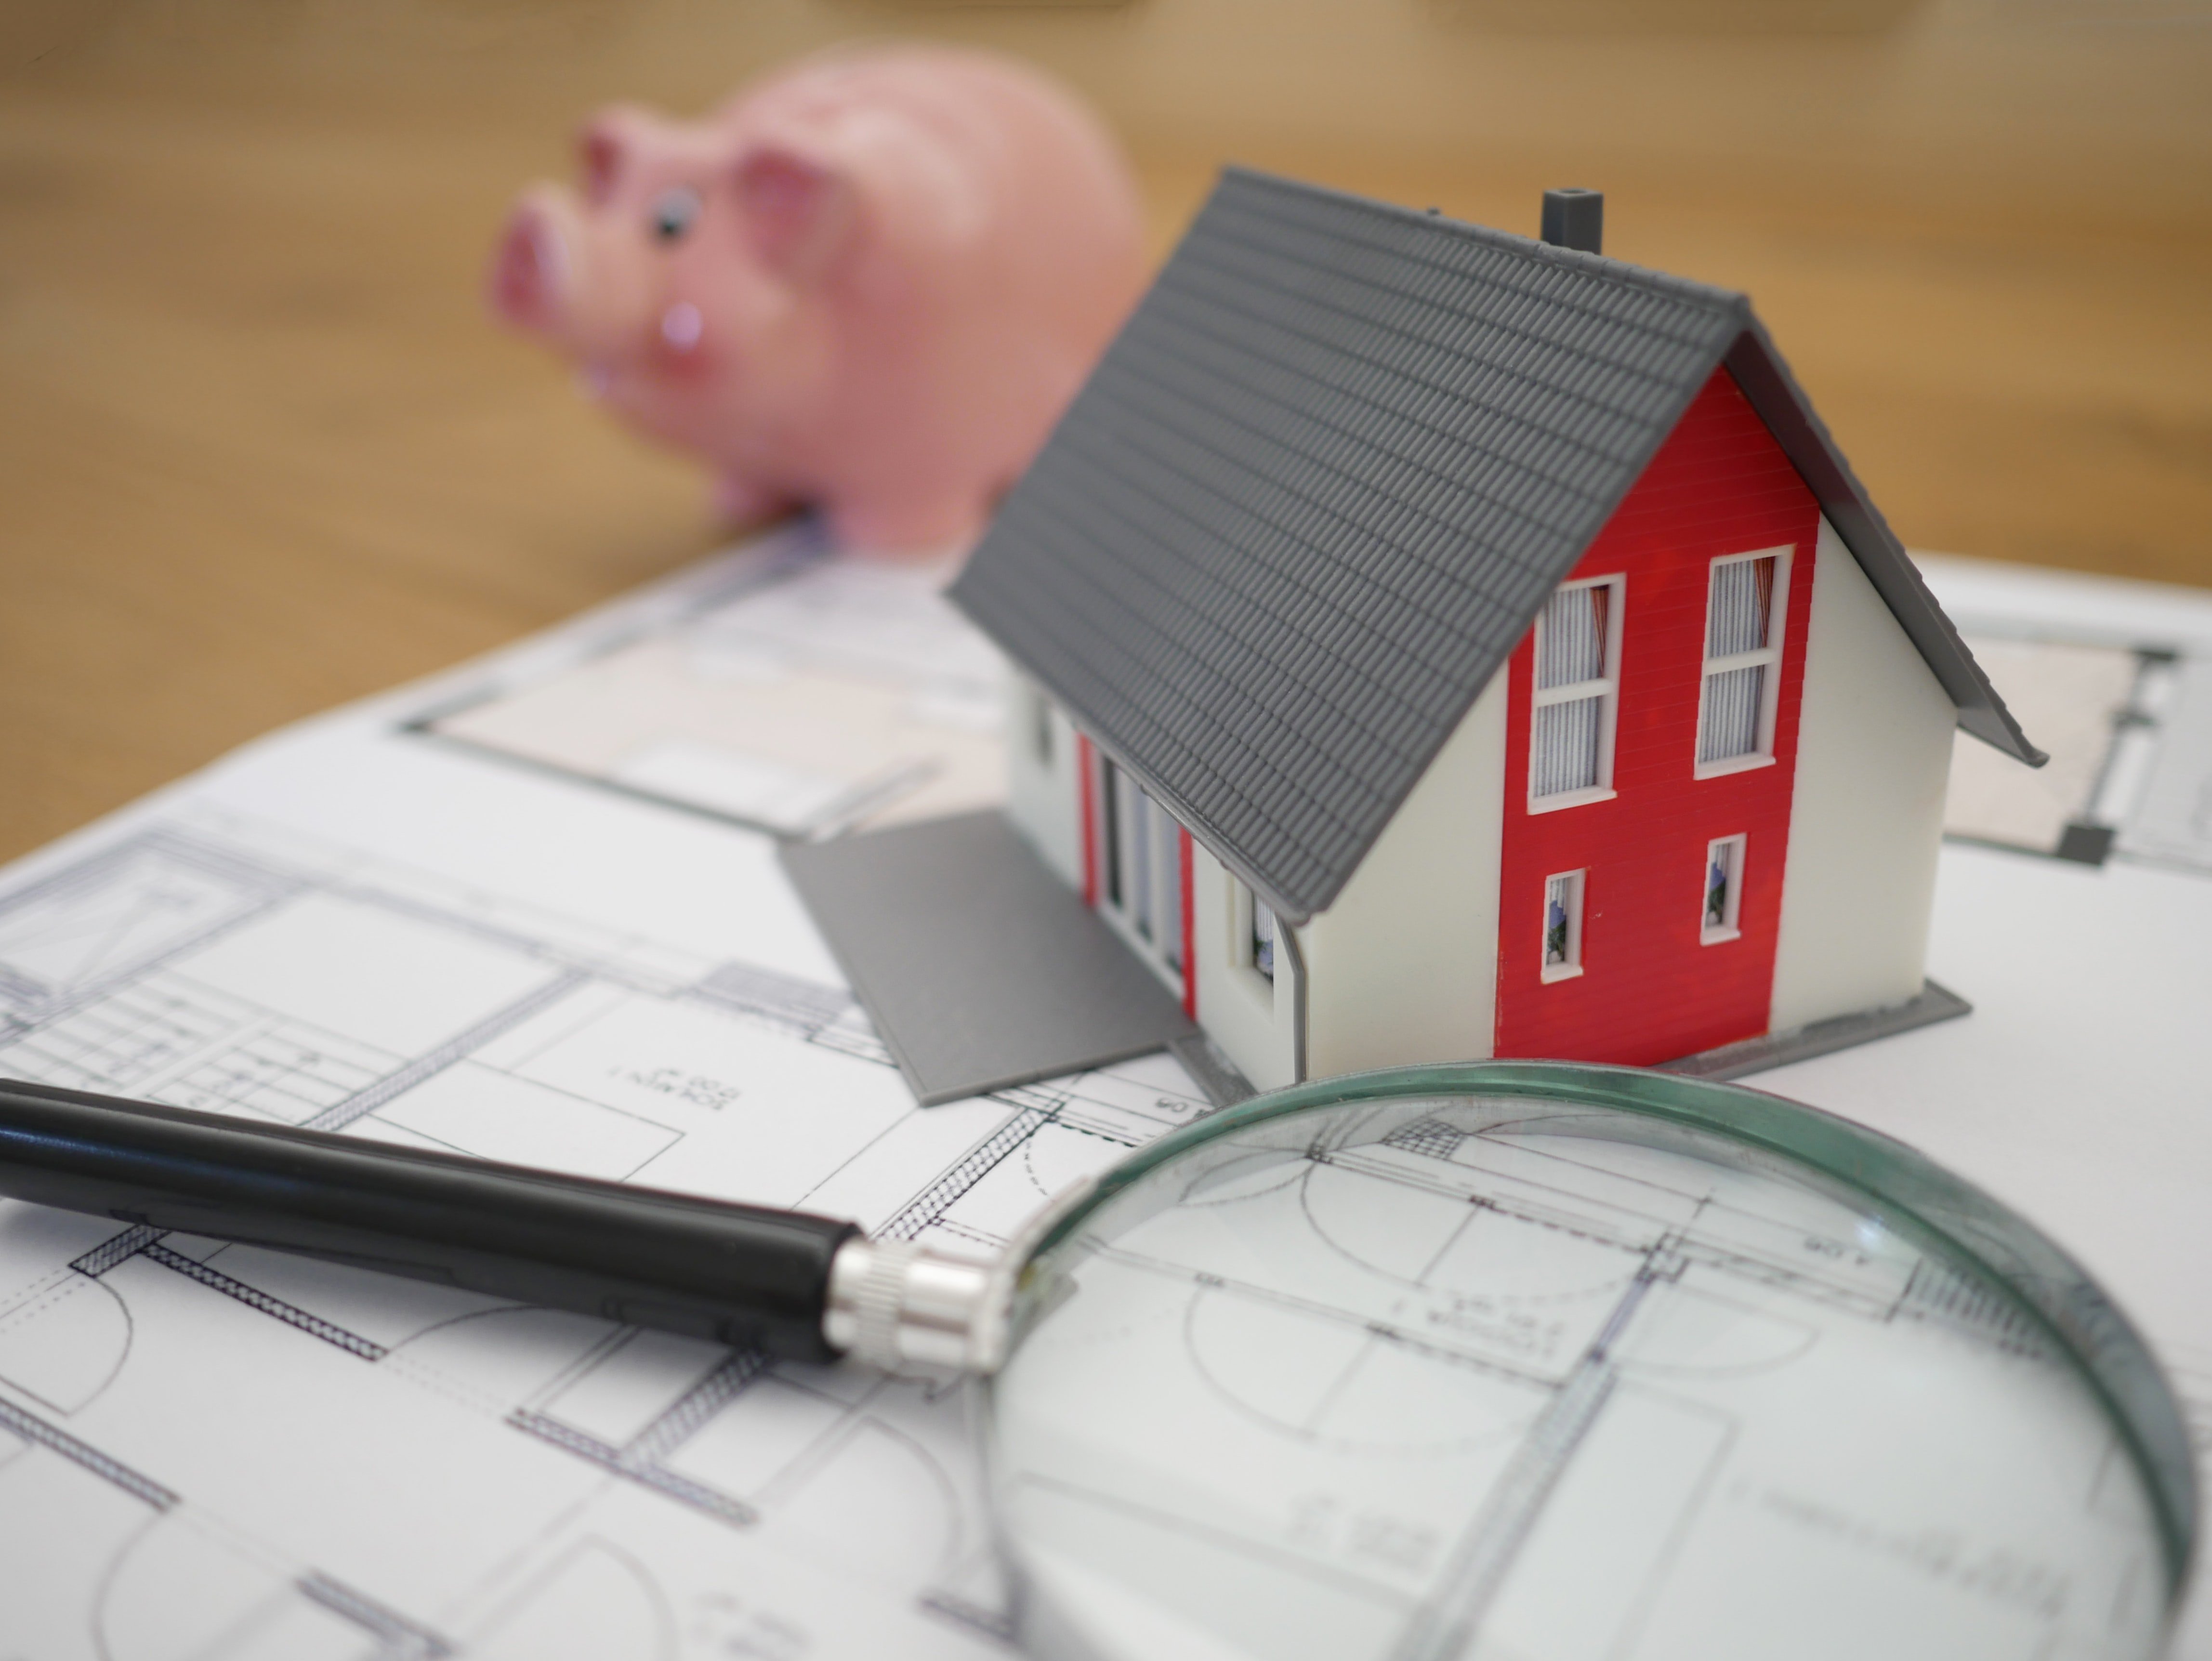 magnifying glass, model home, blueprints and a piggy bank on a table